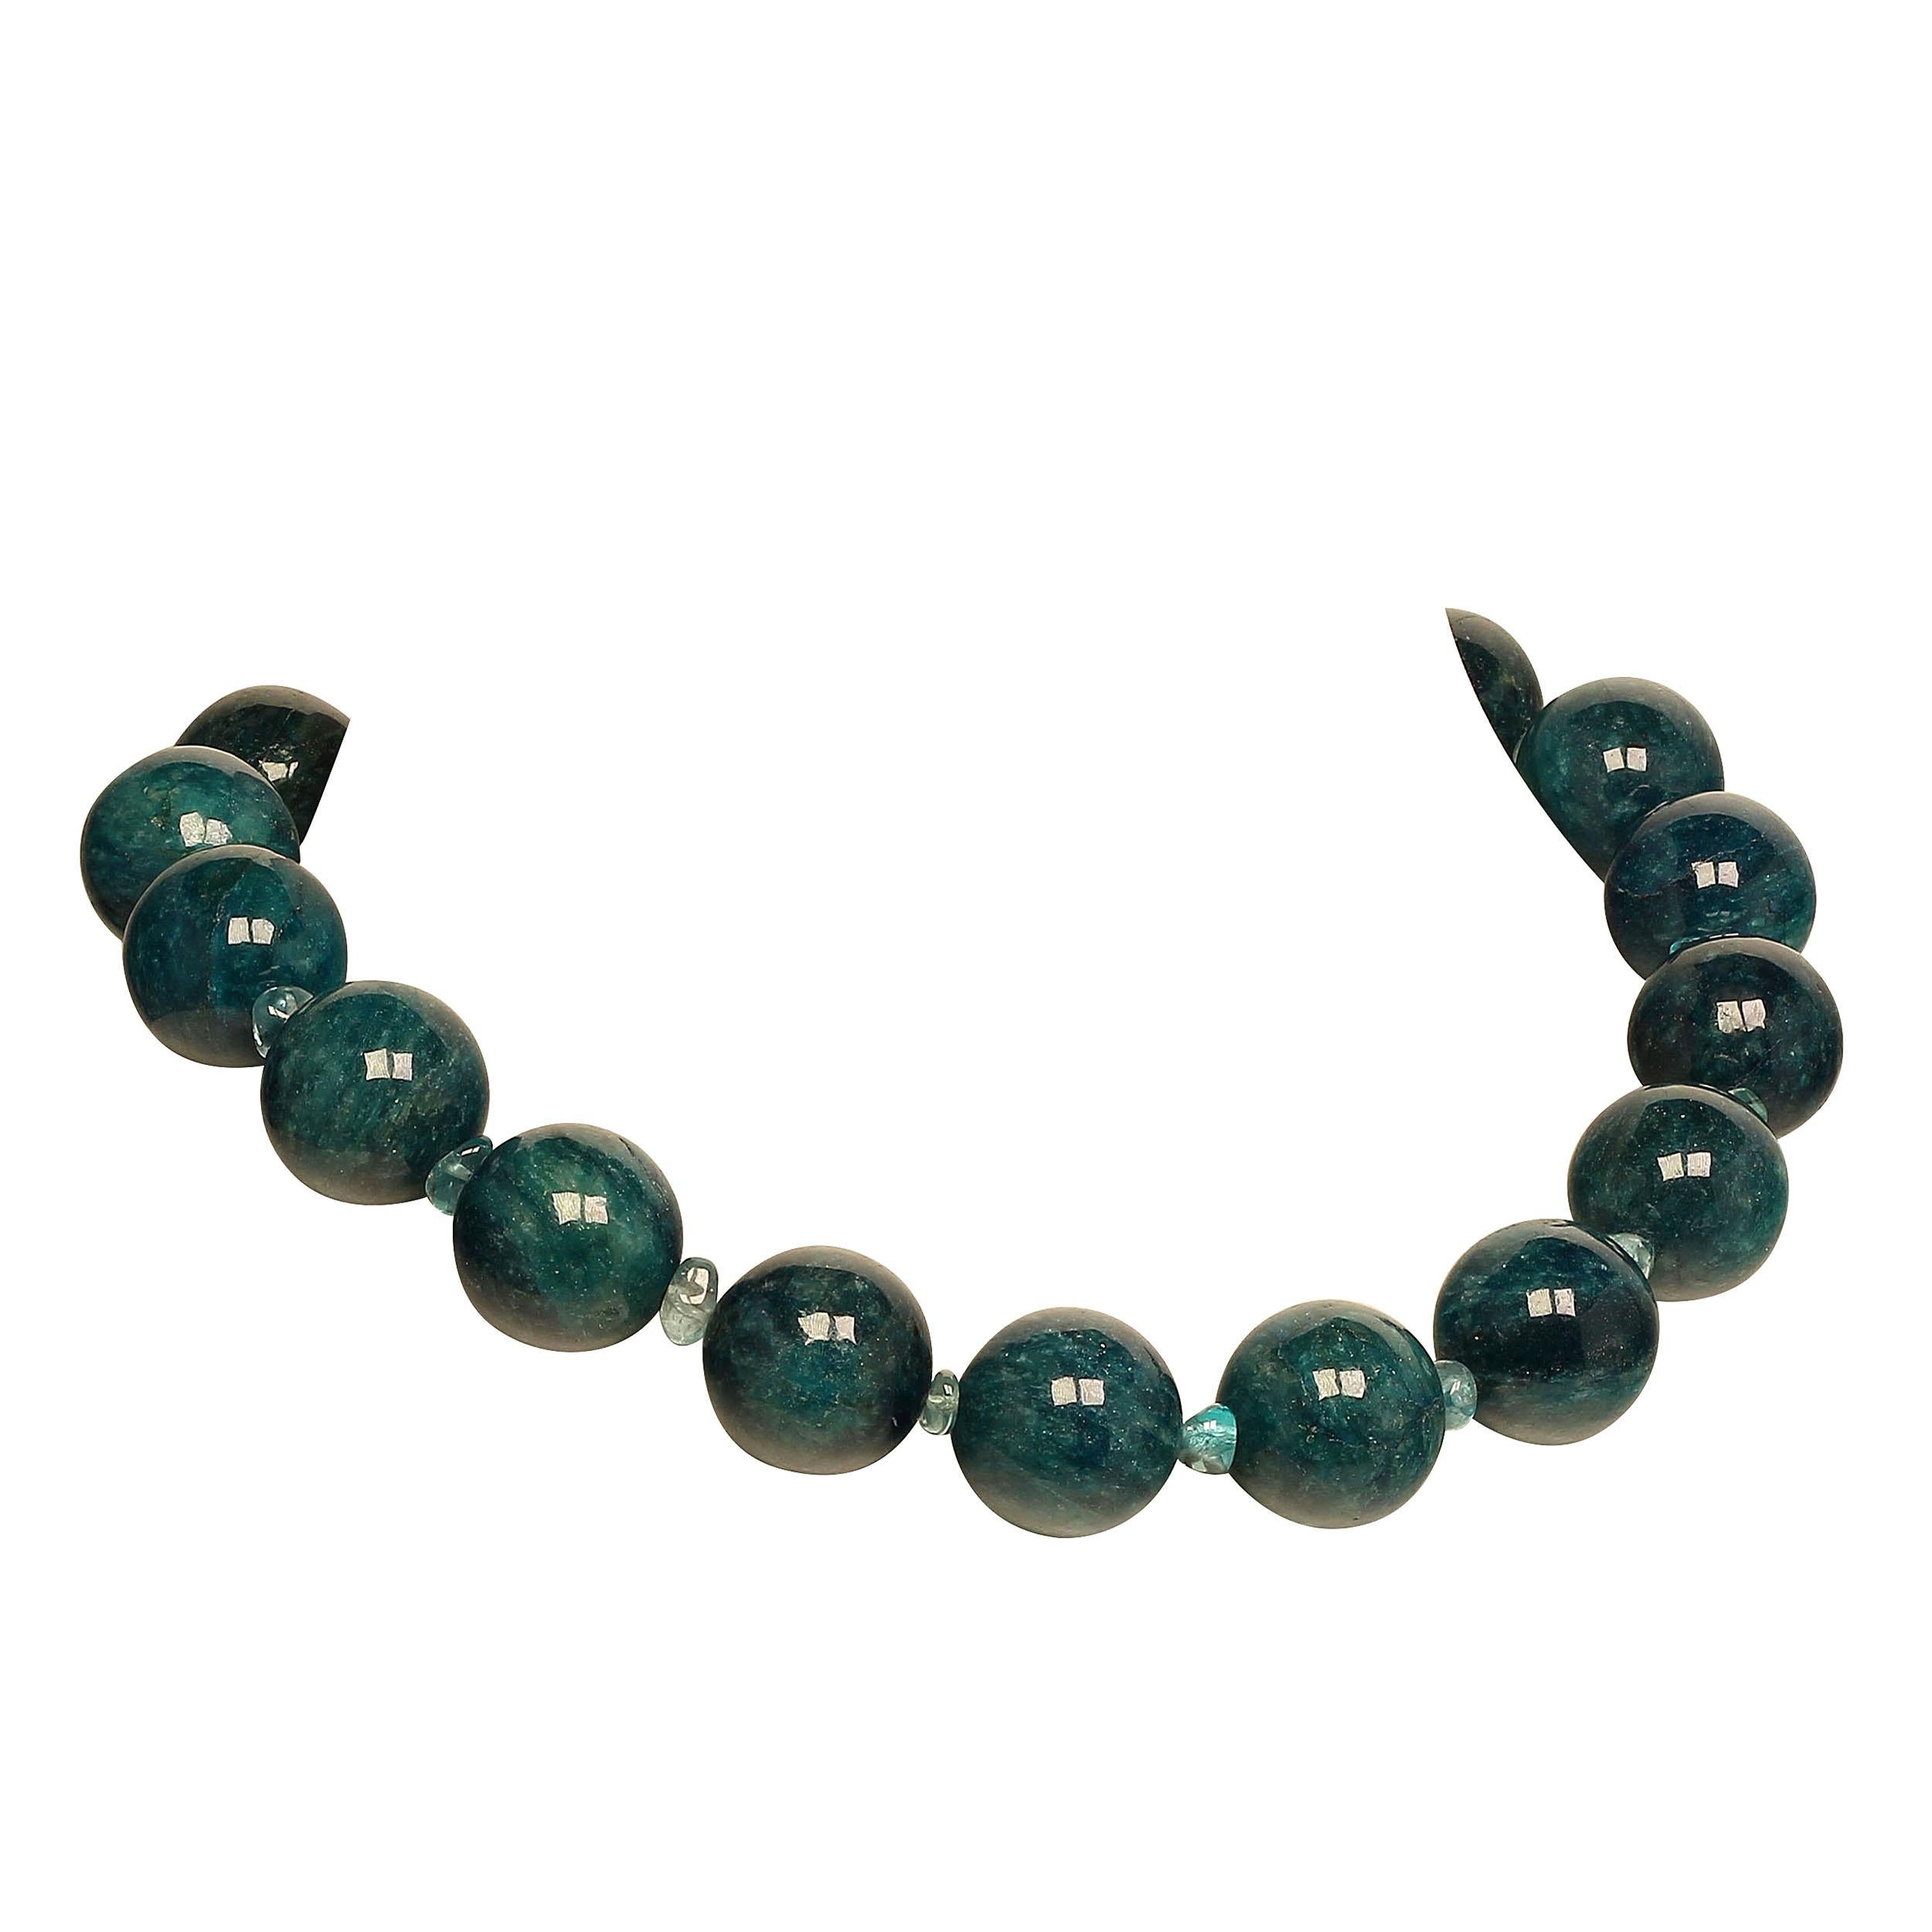 Gemjunky Statement Teal Color Apatite and Apatite Necklace 1